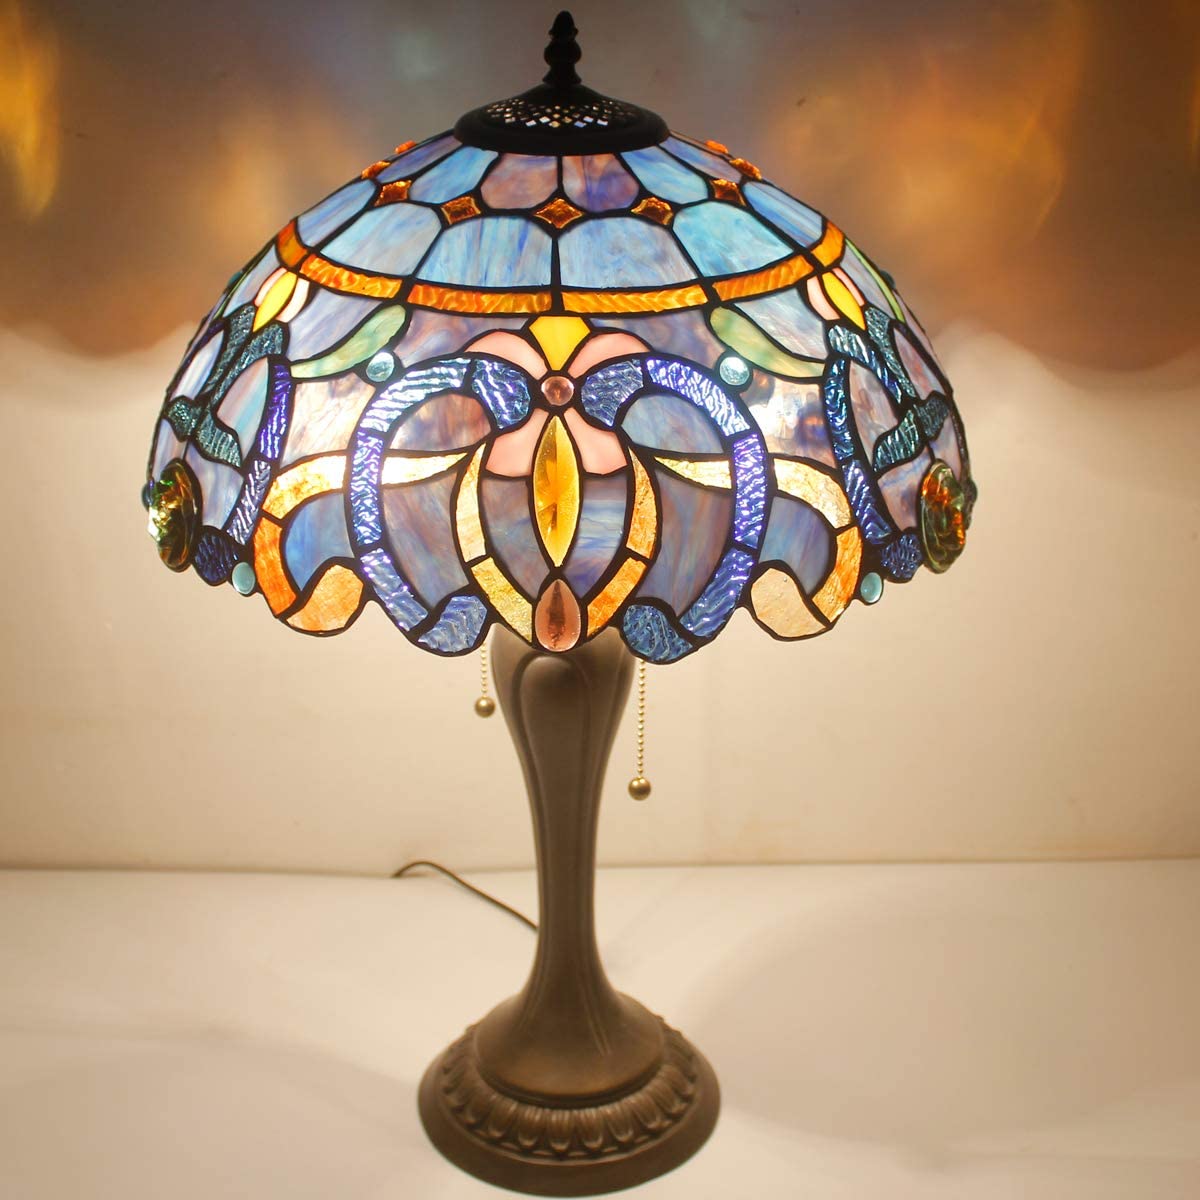 GEDUBIUBOO  Lamp Blue Purple Cloud Stained Glass Style Table Lamp 16X16X24 Inches Desk Bedside Reading Light Metal Base Decor Bedroom Living Room  Office S558 Series